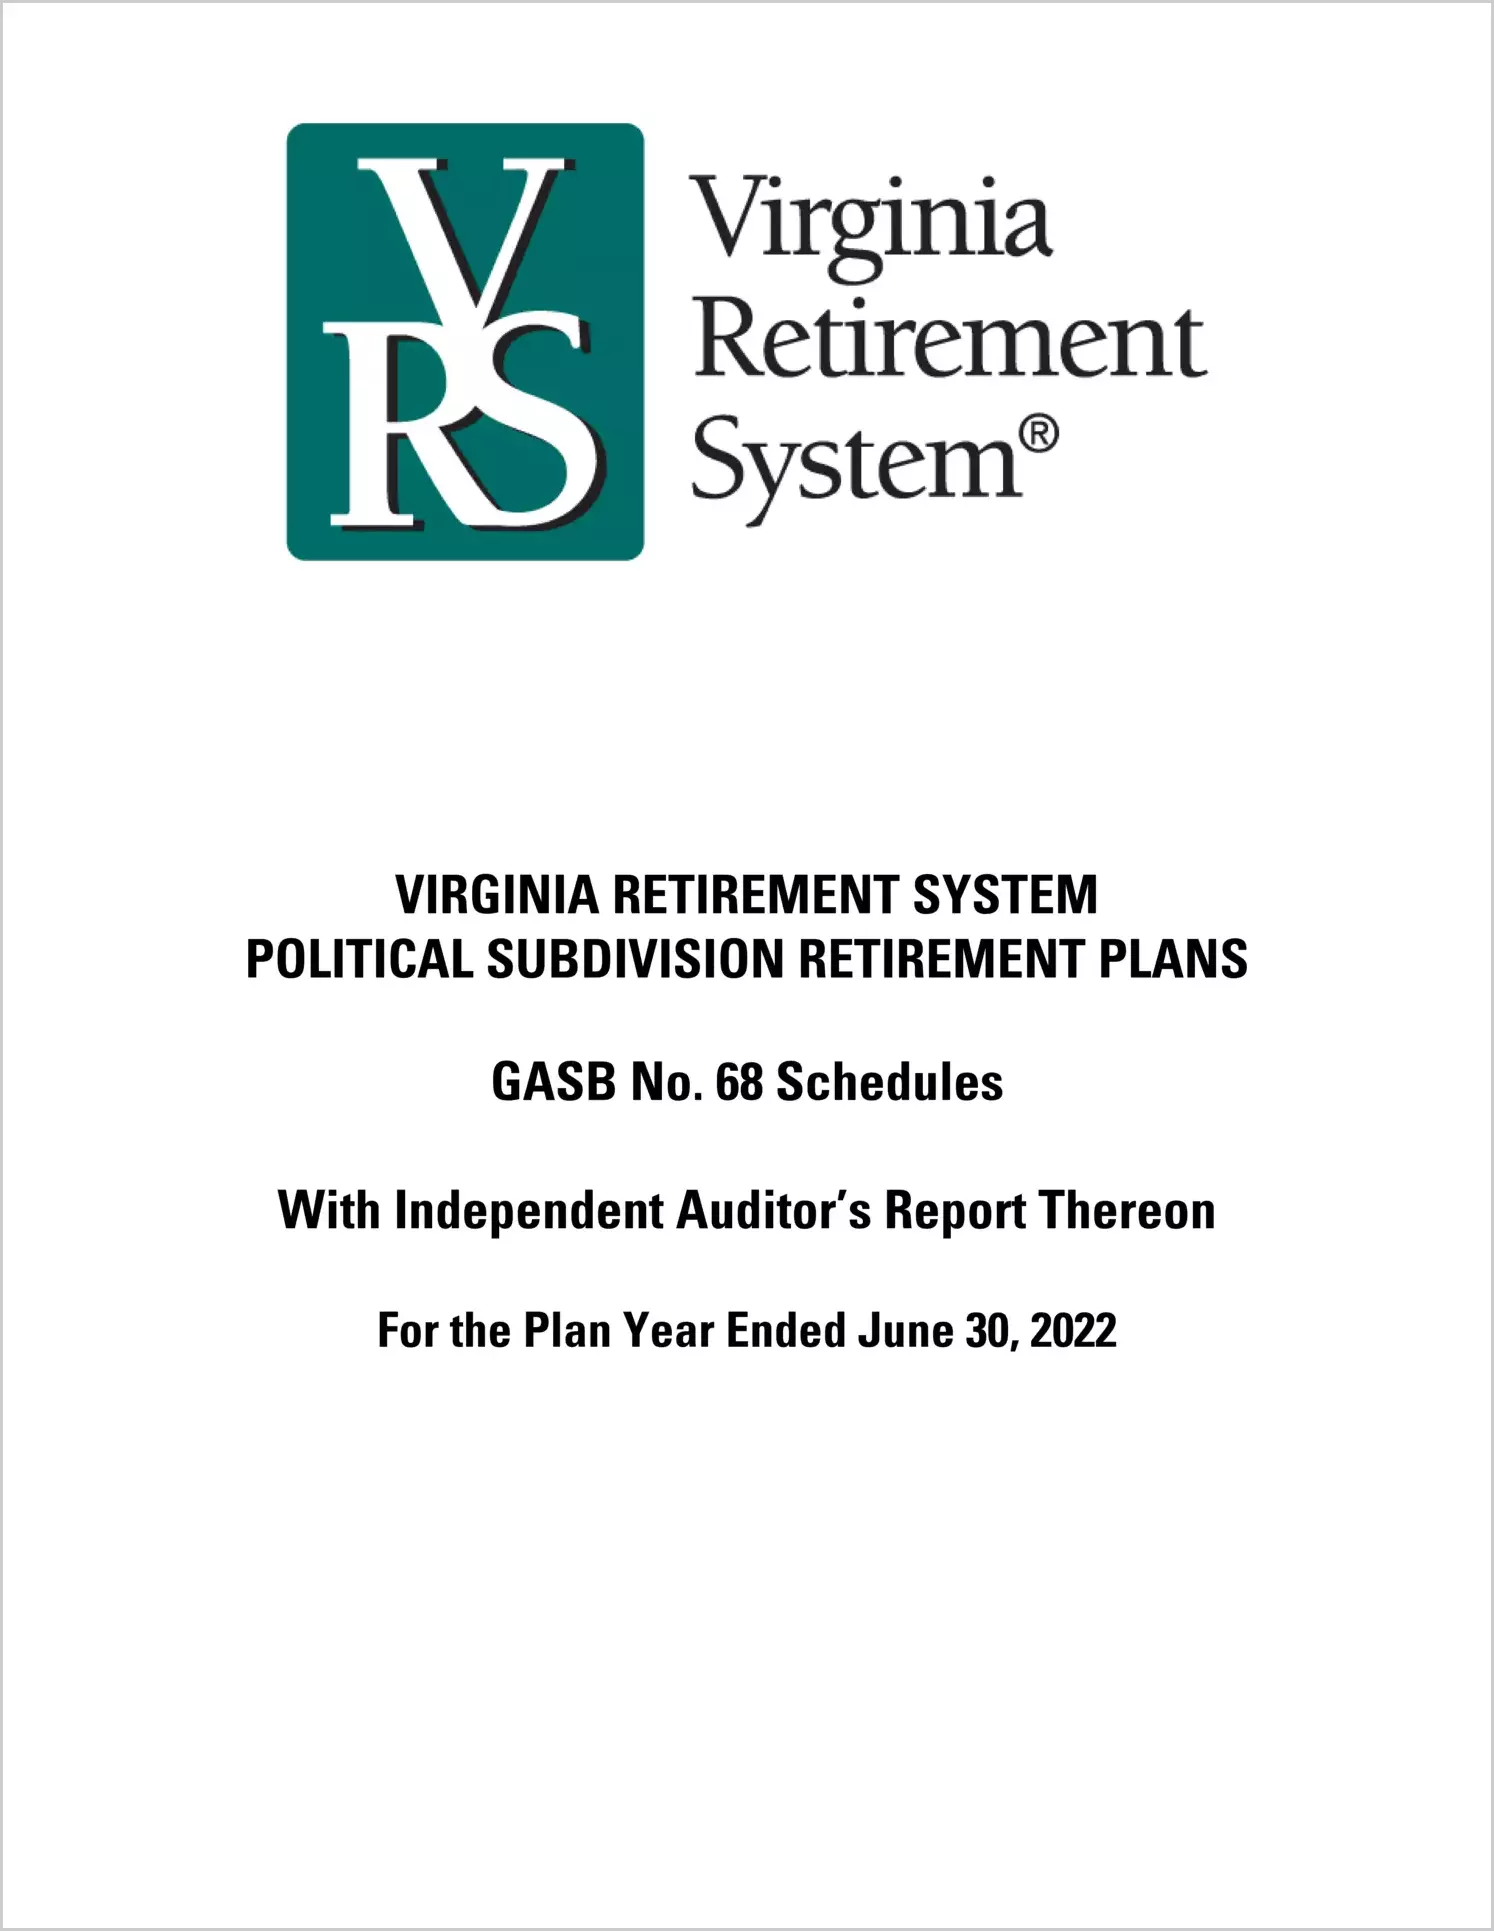 GASB 68 Virginia Retirement System Political Subdivision Retirement Plans for the year ended June 30, 2022